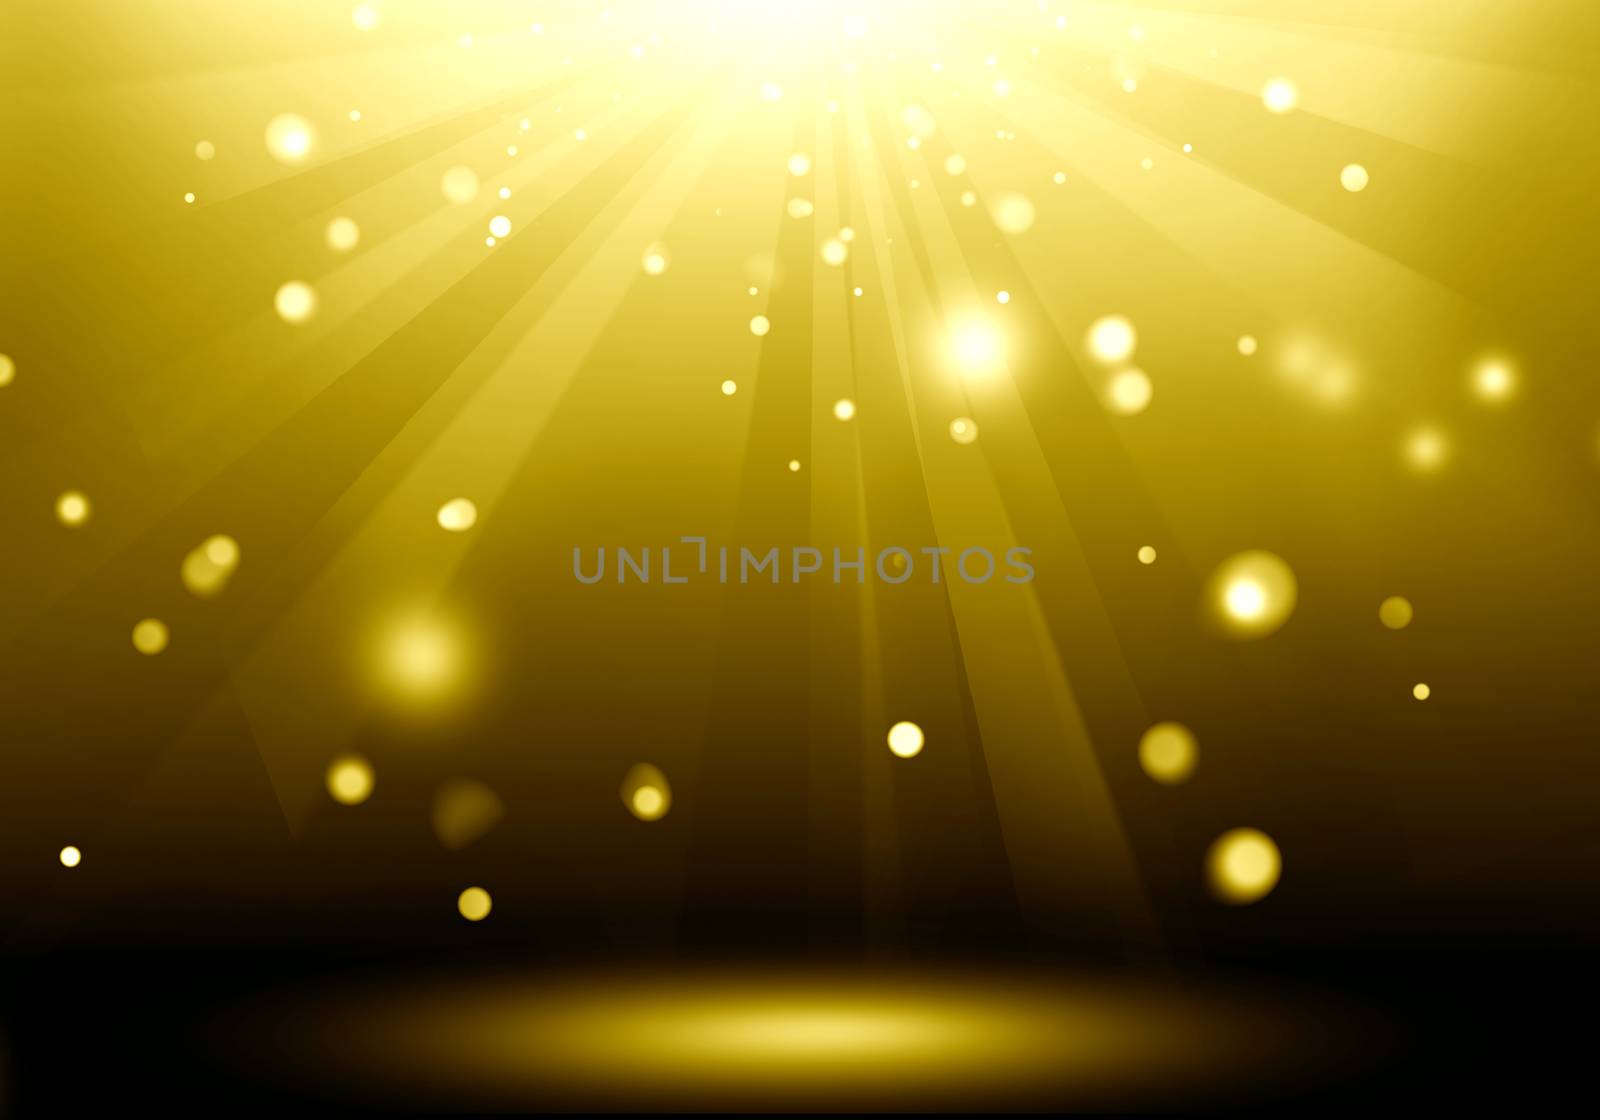 Abstract image of gold lighting flare on the floor stage : Fill  by jayzynism